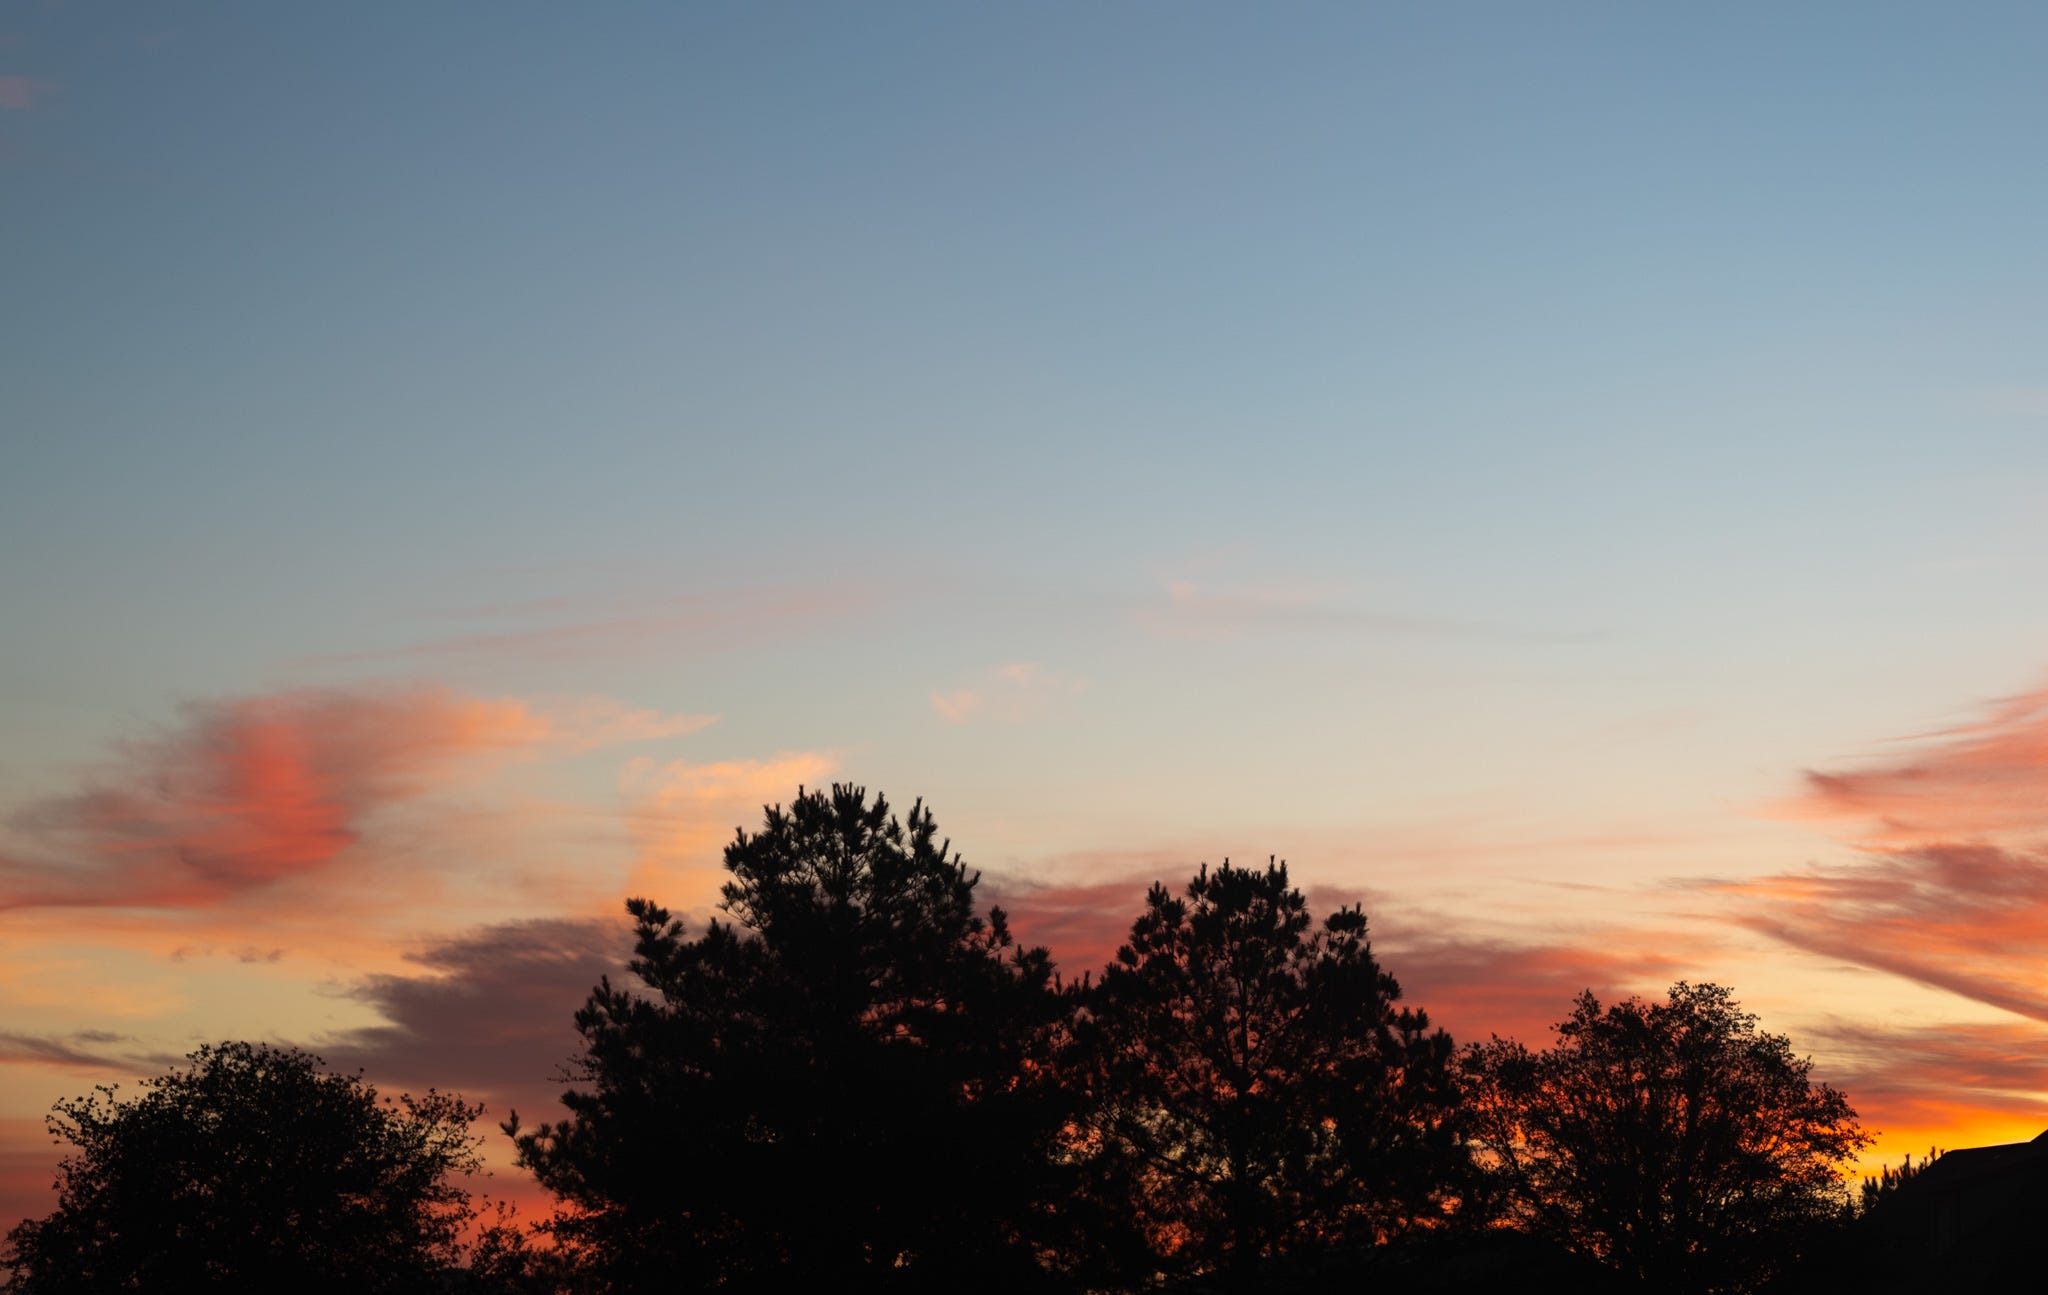 Sunrise with a blue sky, clouds hovering above the horizon of trees , the suns light casting shades of orange, pink, and grey across the clouds